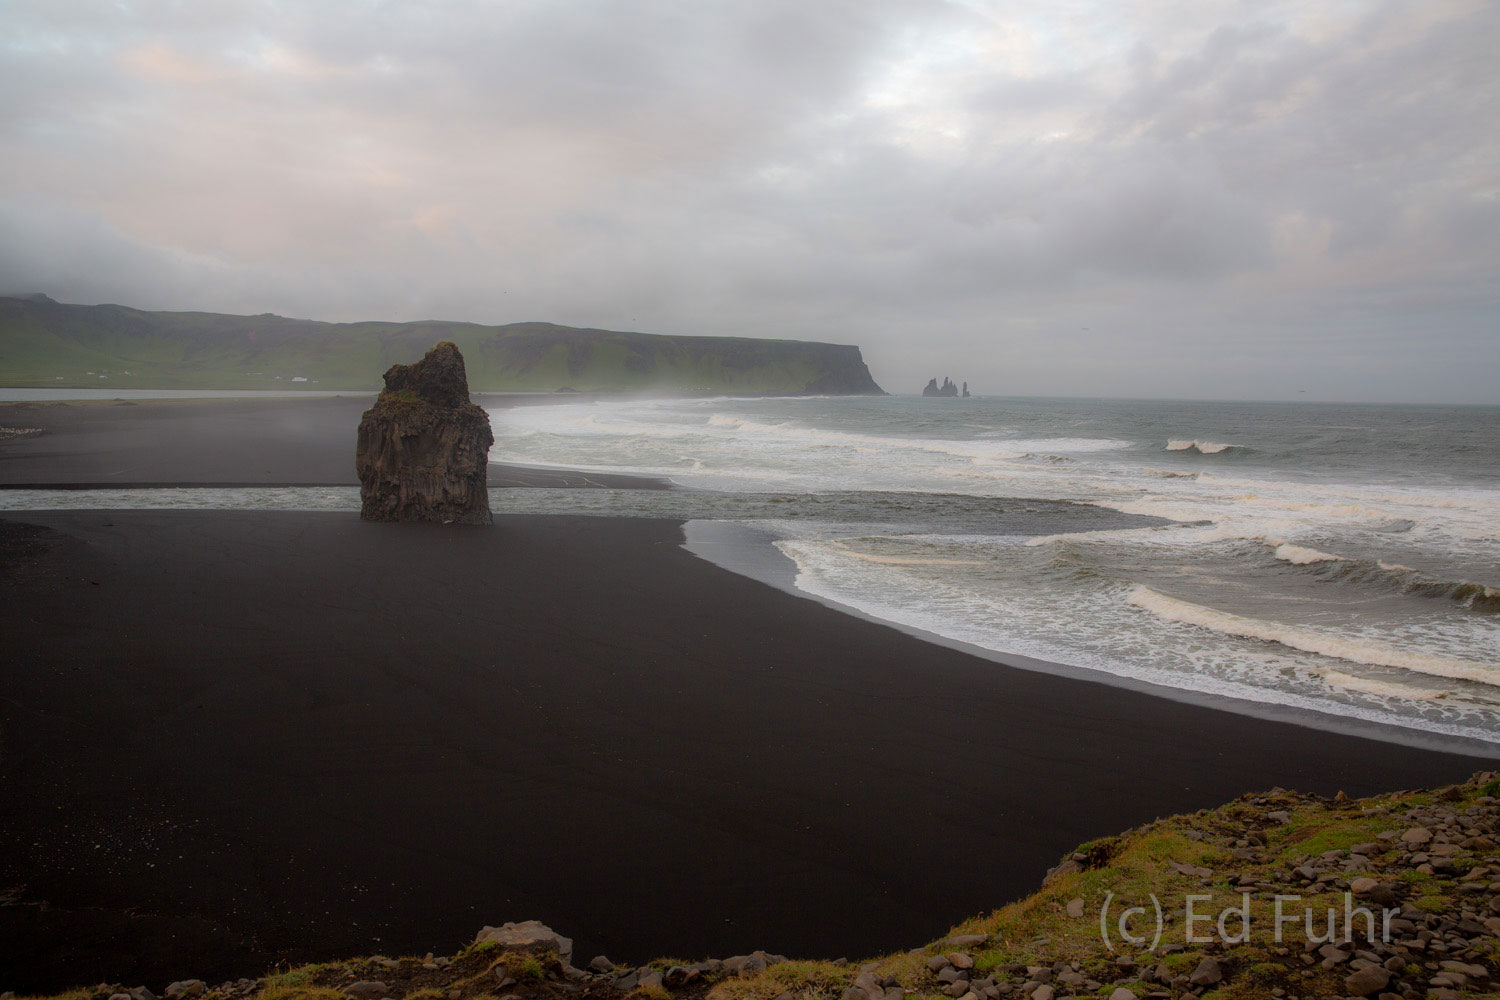 From the cliffs at Cape Dyrholaev stretch miles of black sand beaches.